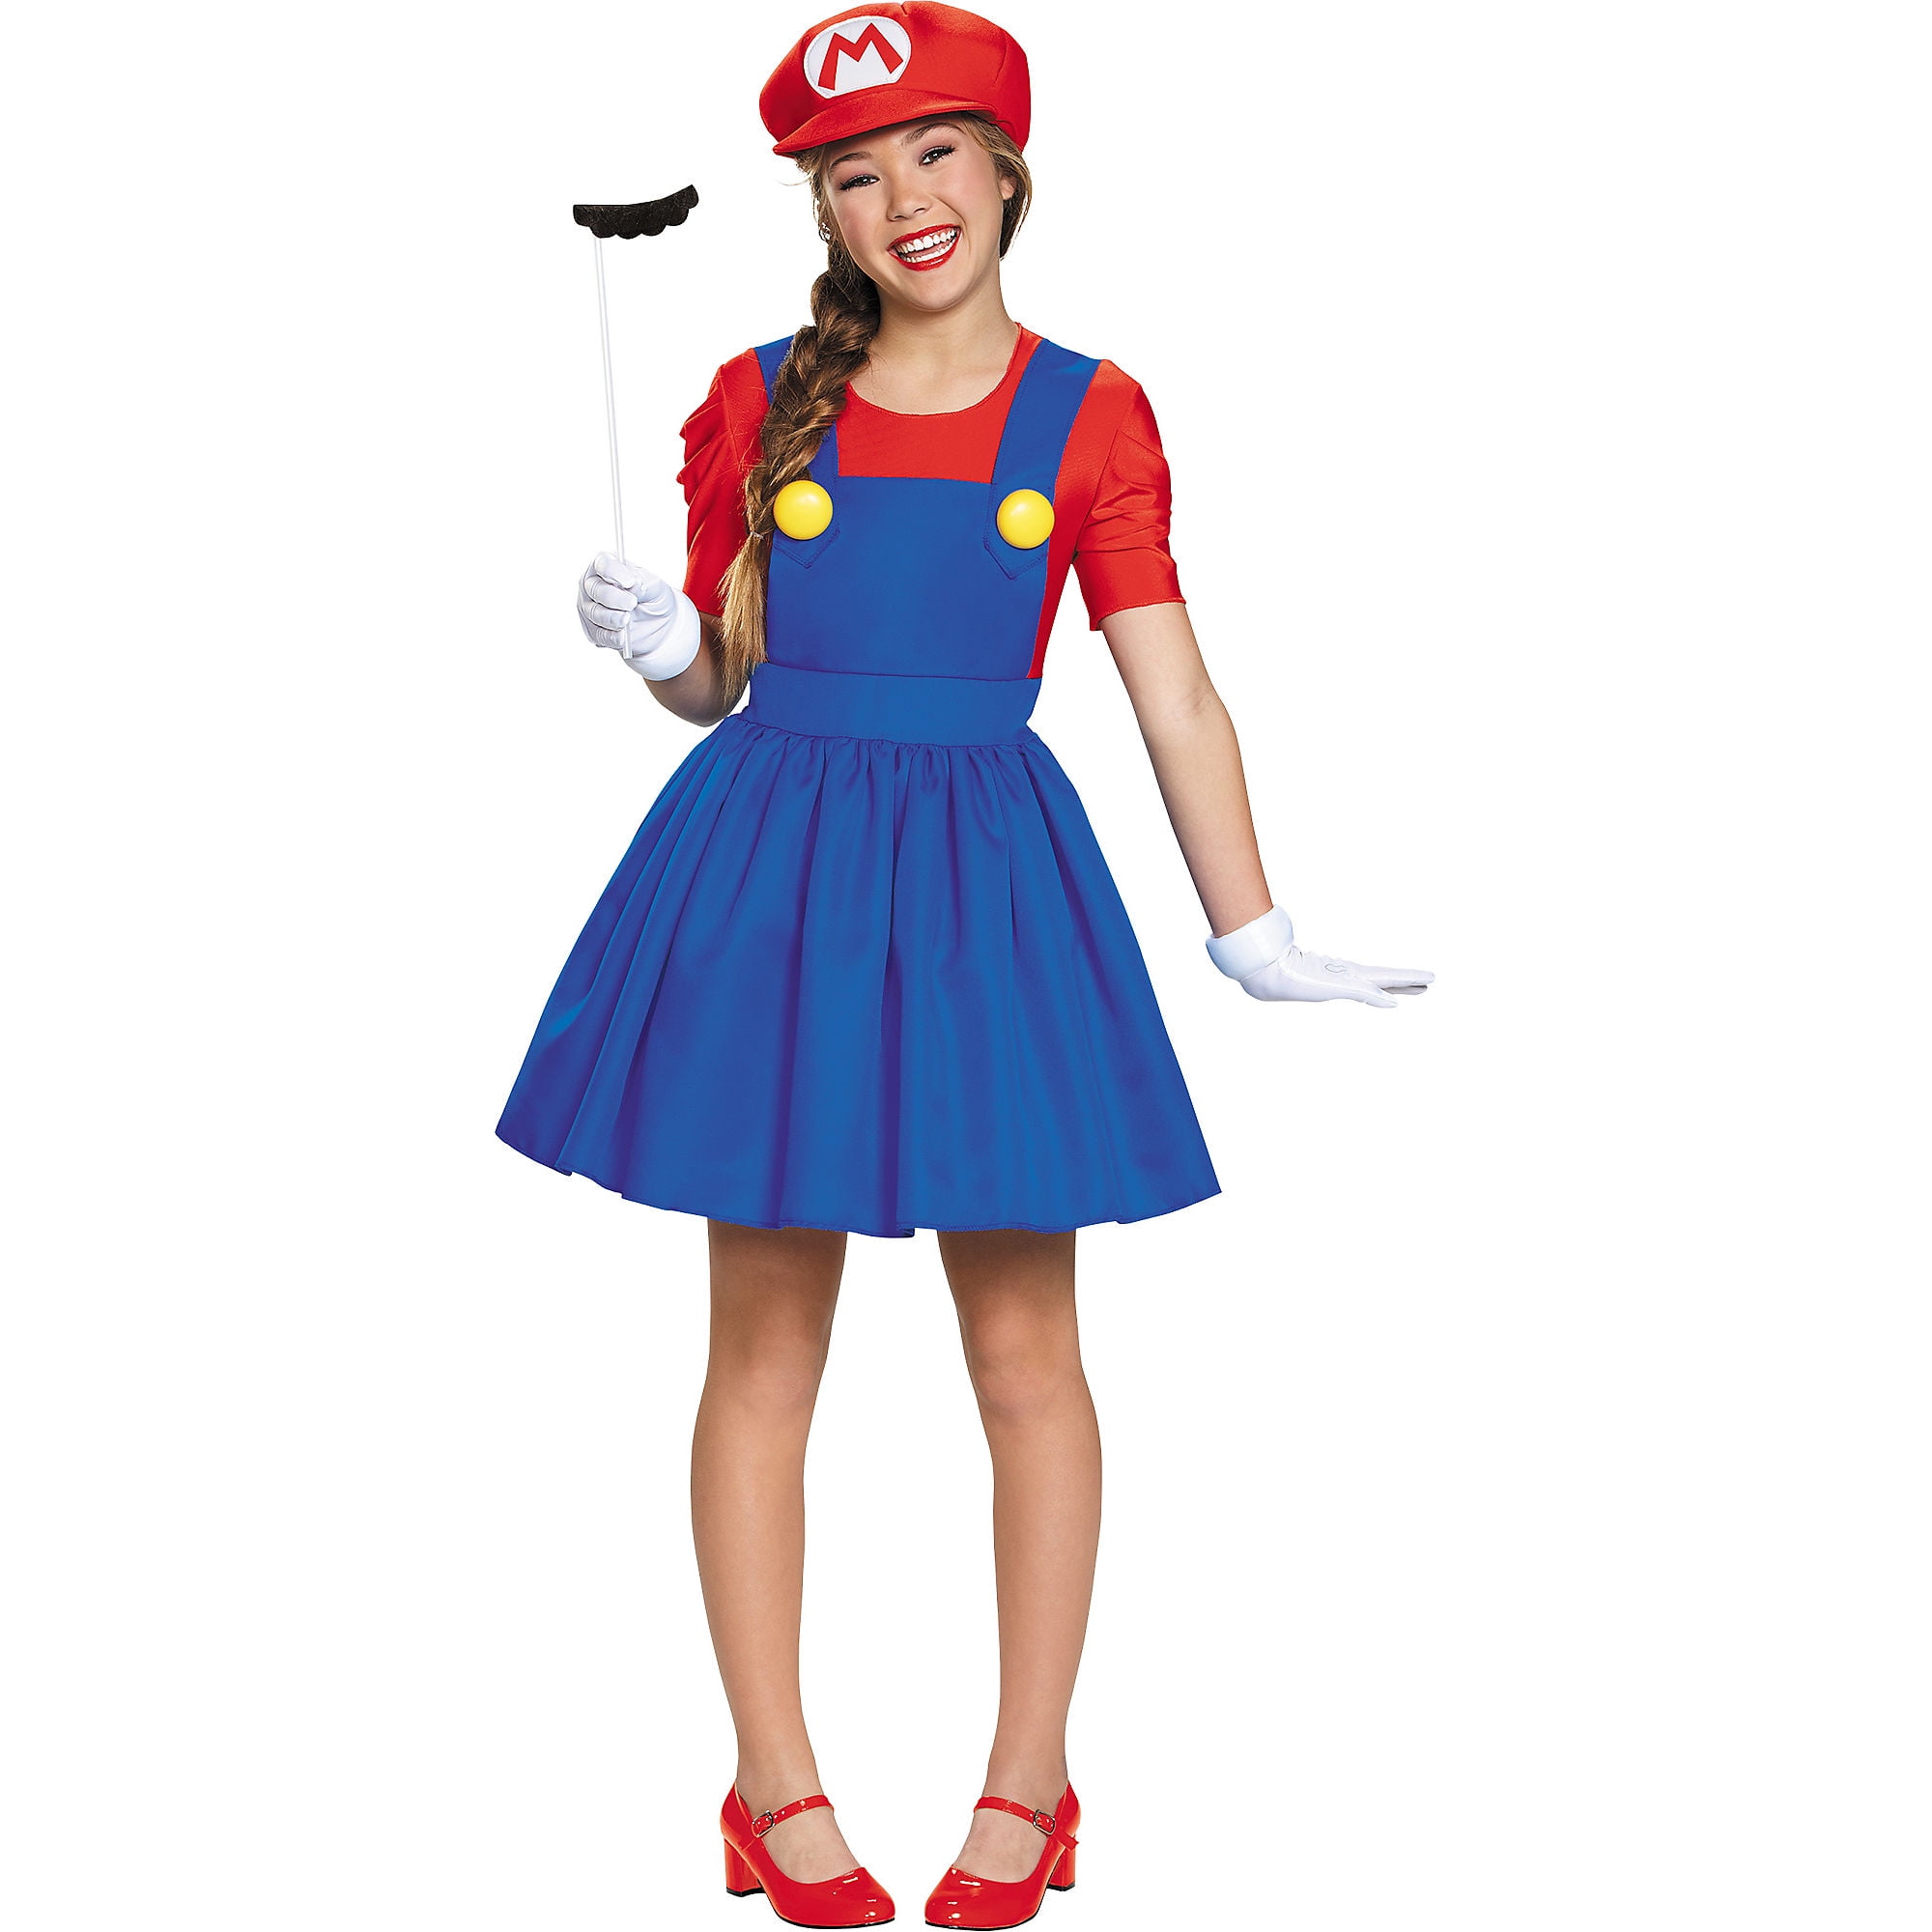 Mario Cosplay Dress Woman/'s Costume Geek Super Mario Brothers Video Game Custom to Order Petite to Plus Size